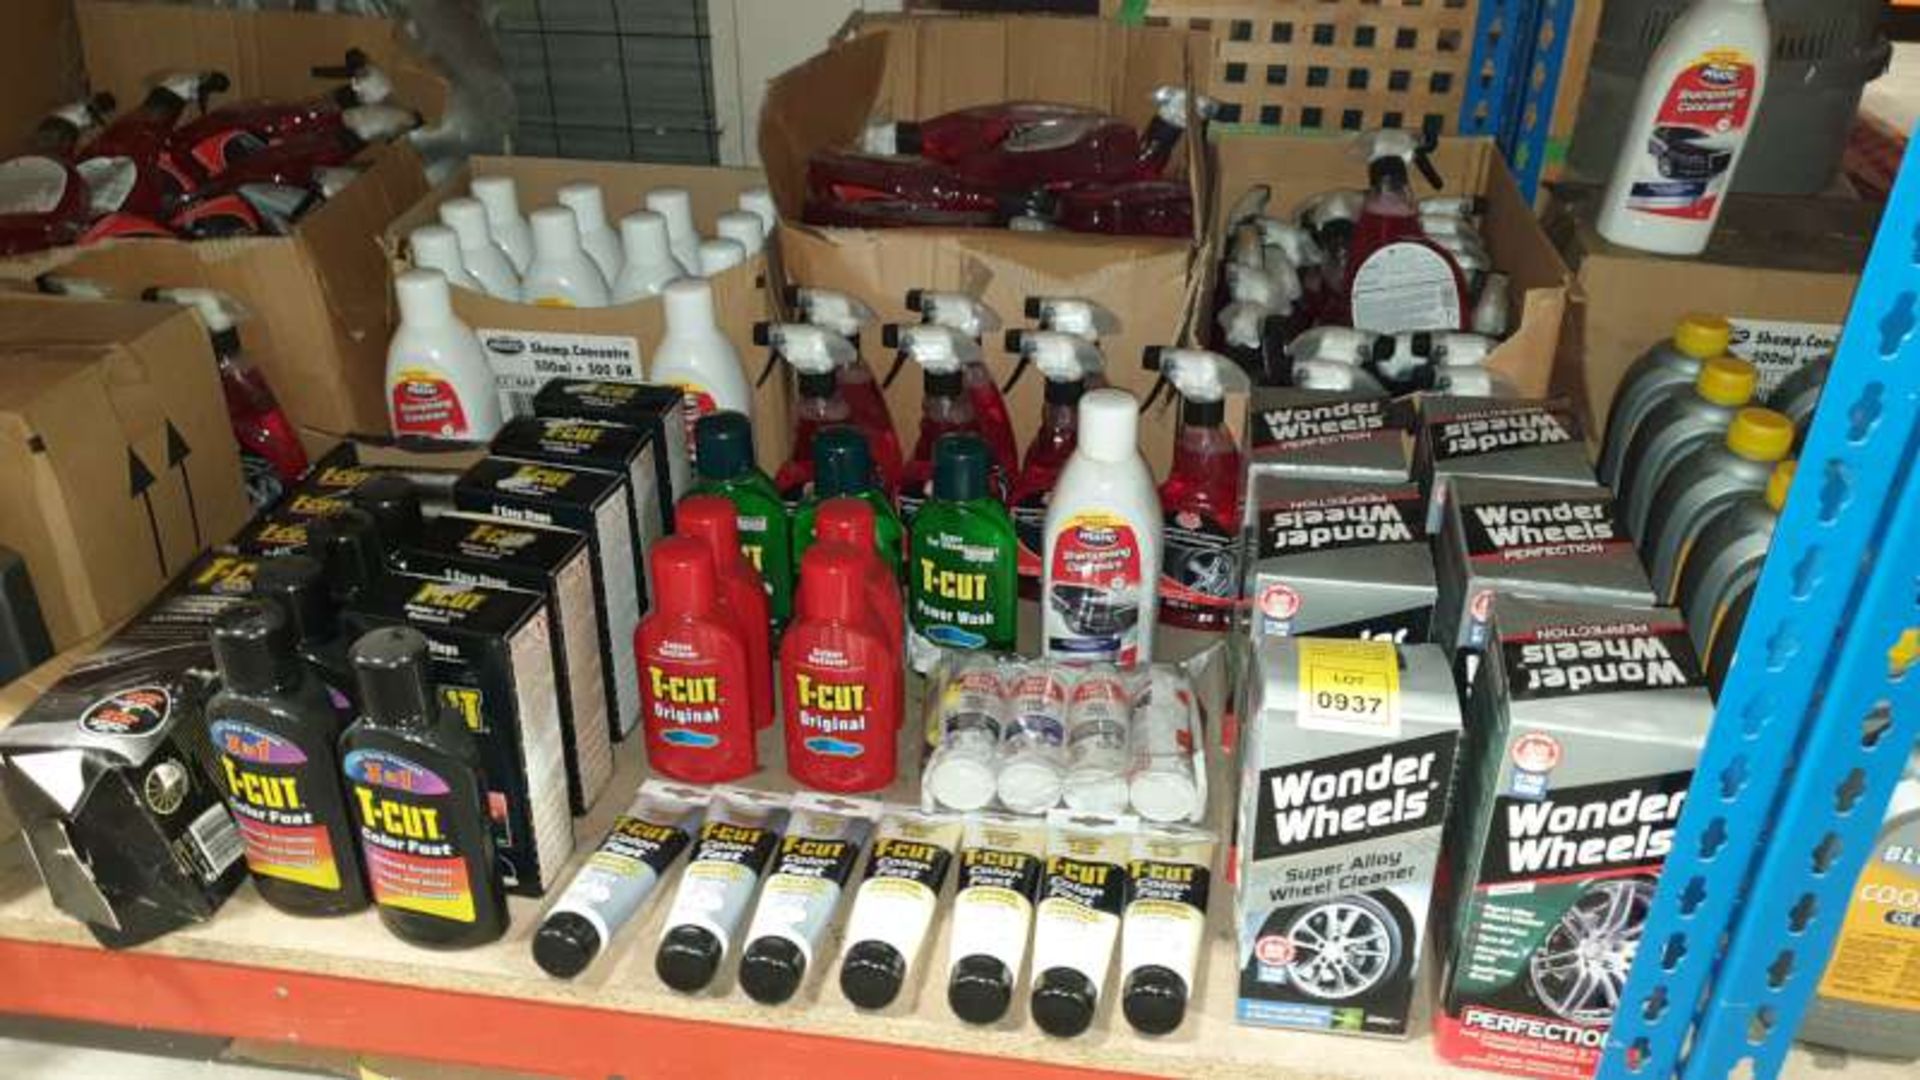 LOT CONTAINING T-CUT COLOUR FAST, SCRATCH REMOVERS, SUPER ALLOY WHEEL CLEANERS, ADVANCED WASH AND